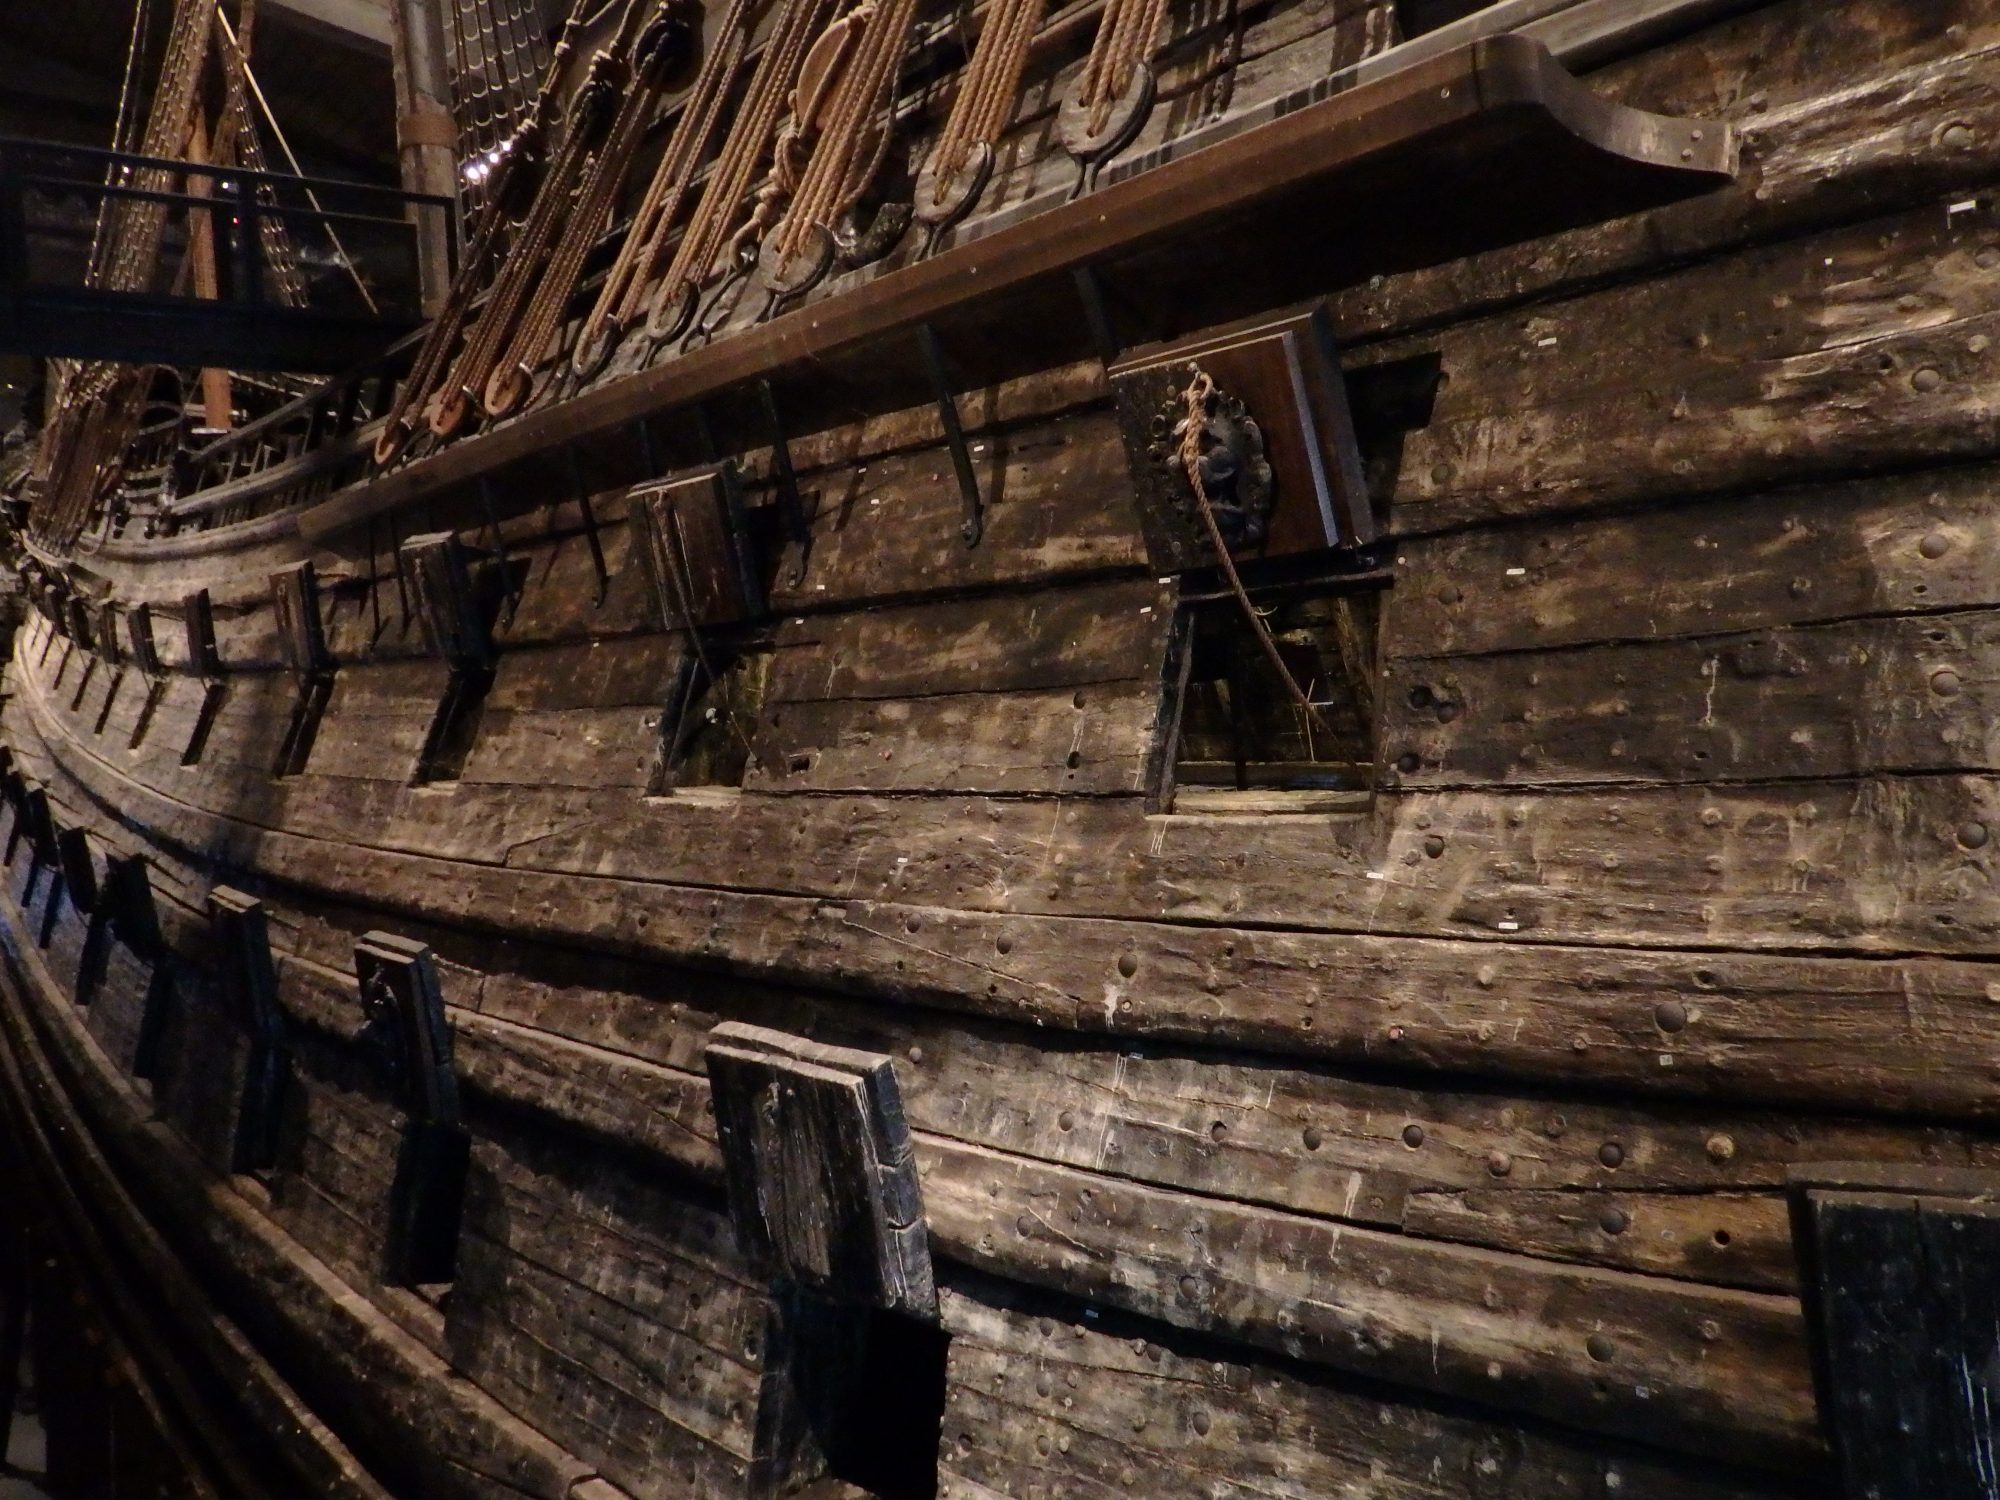 a view down the side of the Vasa showing both rows of gunports: Stockholm, Sweden